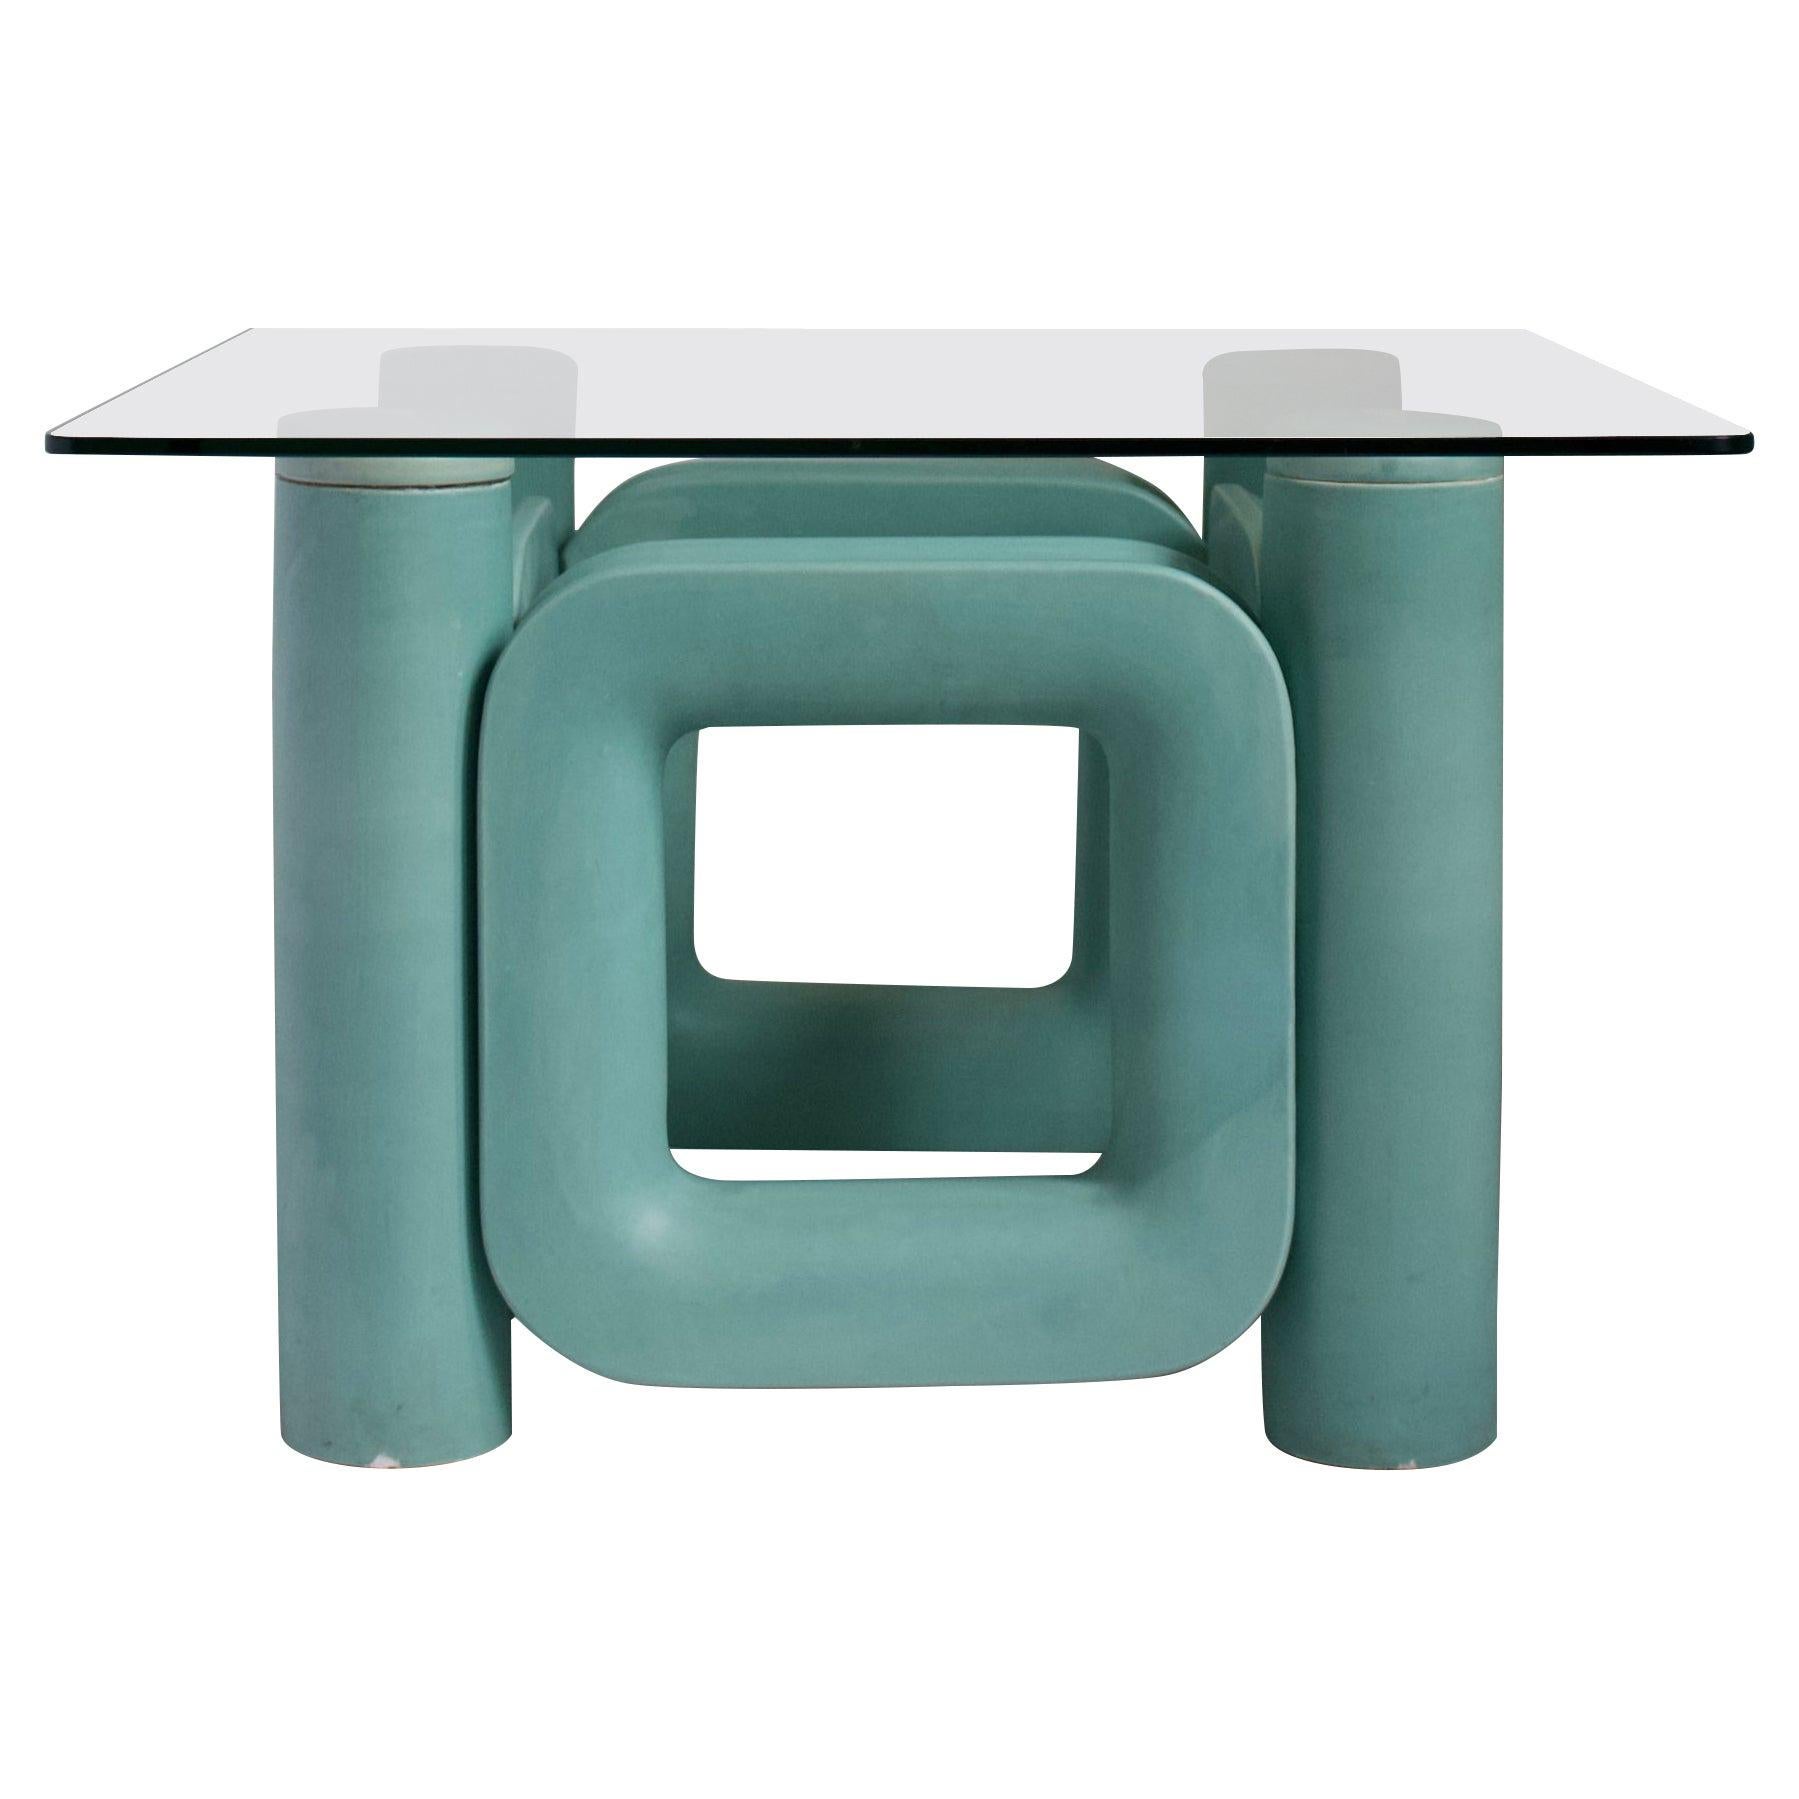 Sculptural Ceramic Coffee Table with Blue-Turquoise Satin Glaze, Italy, 1970s